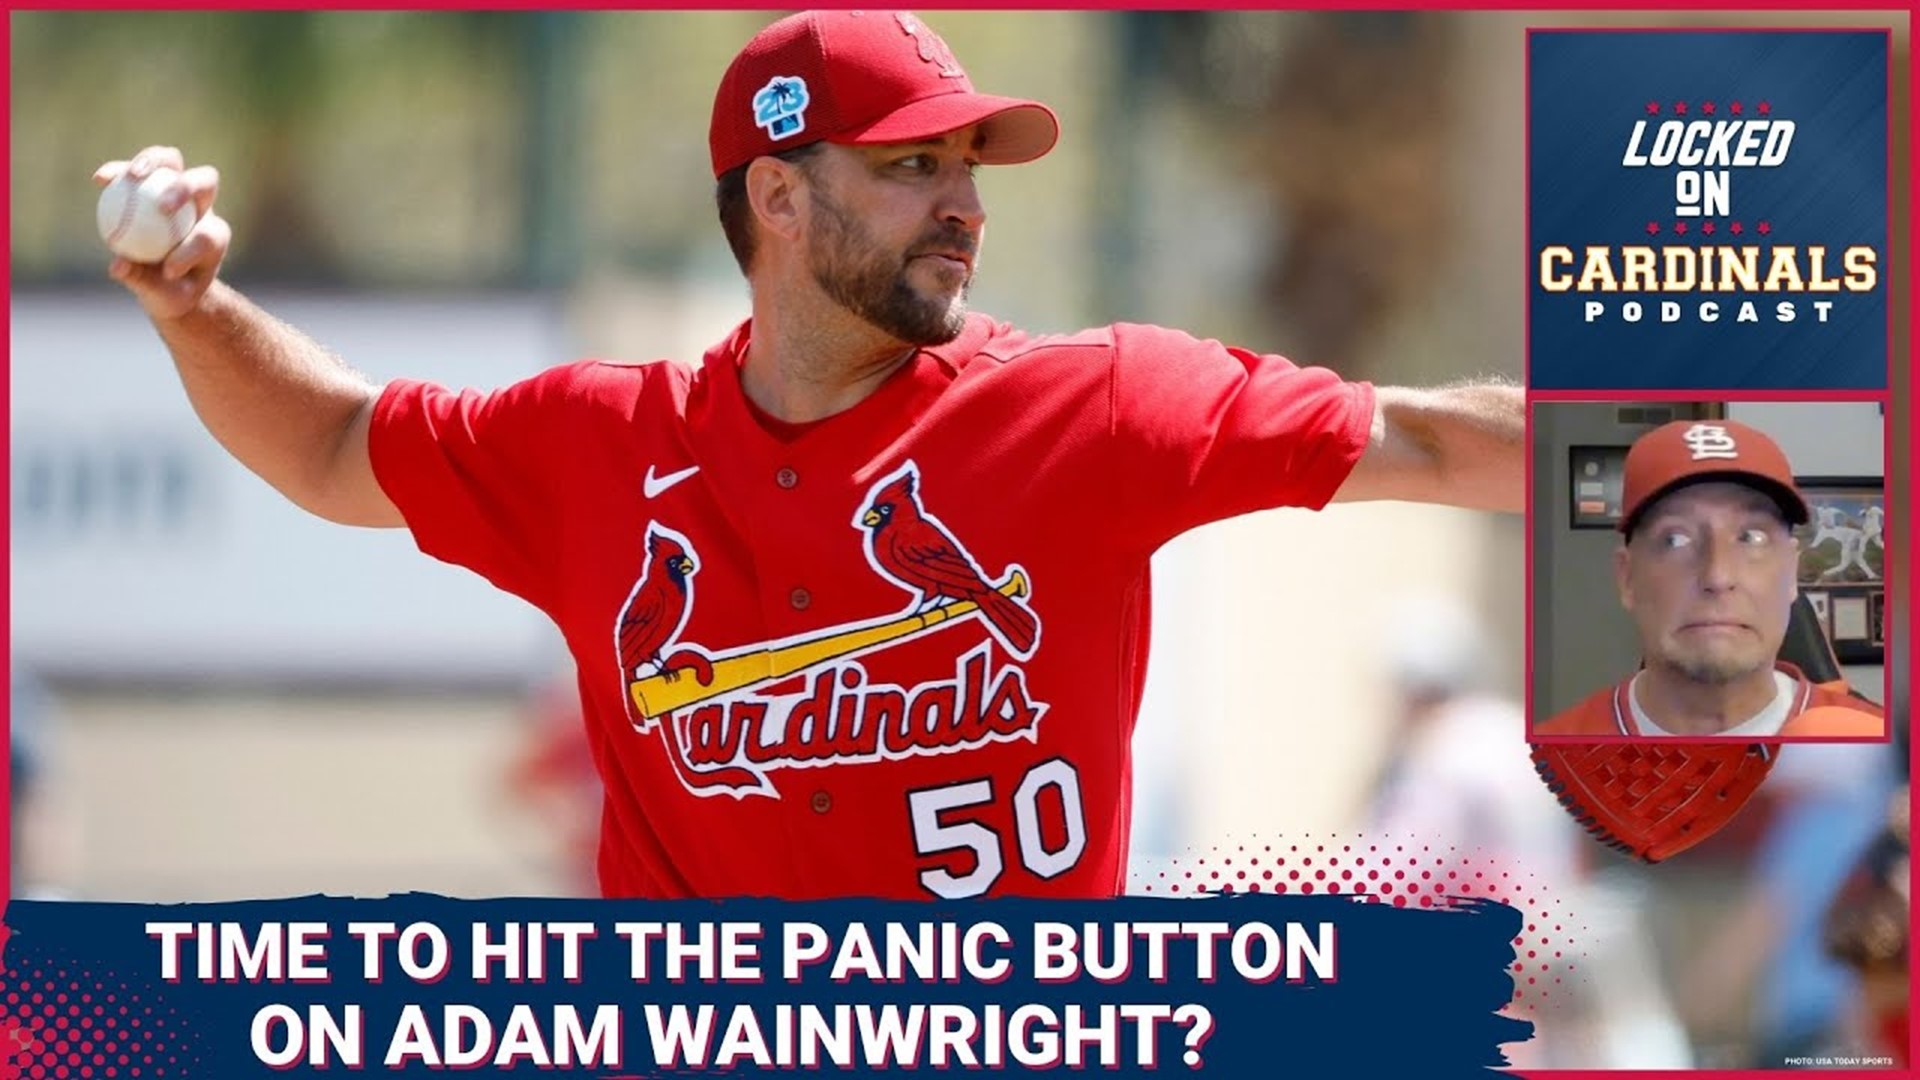 St. Louis Cardinal's starter Adam Wainwright has been on a disturbing downward trajectory since last September. How concerned should we be?